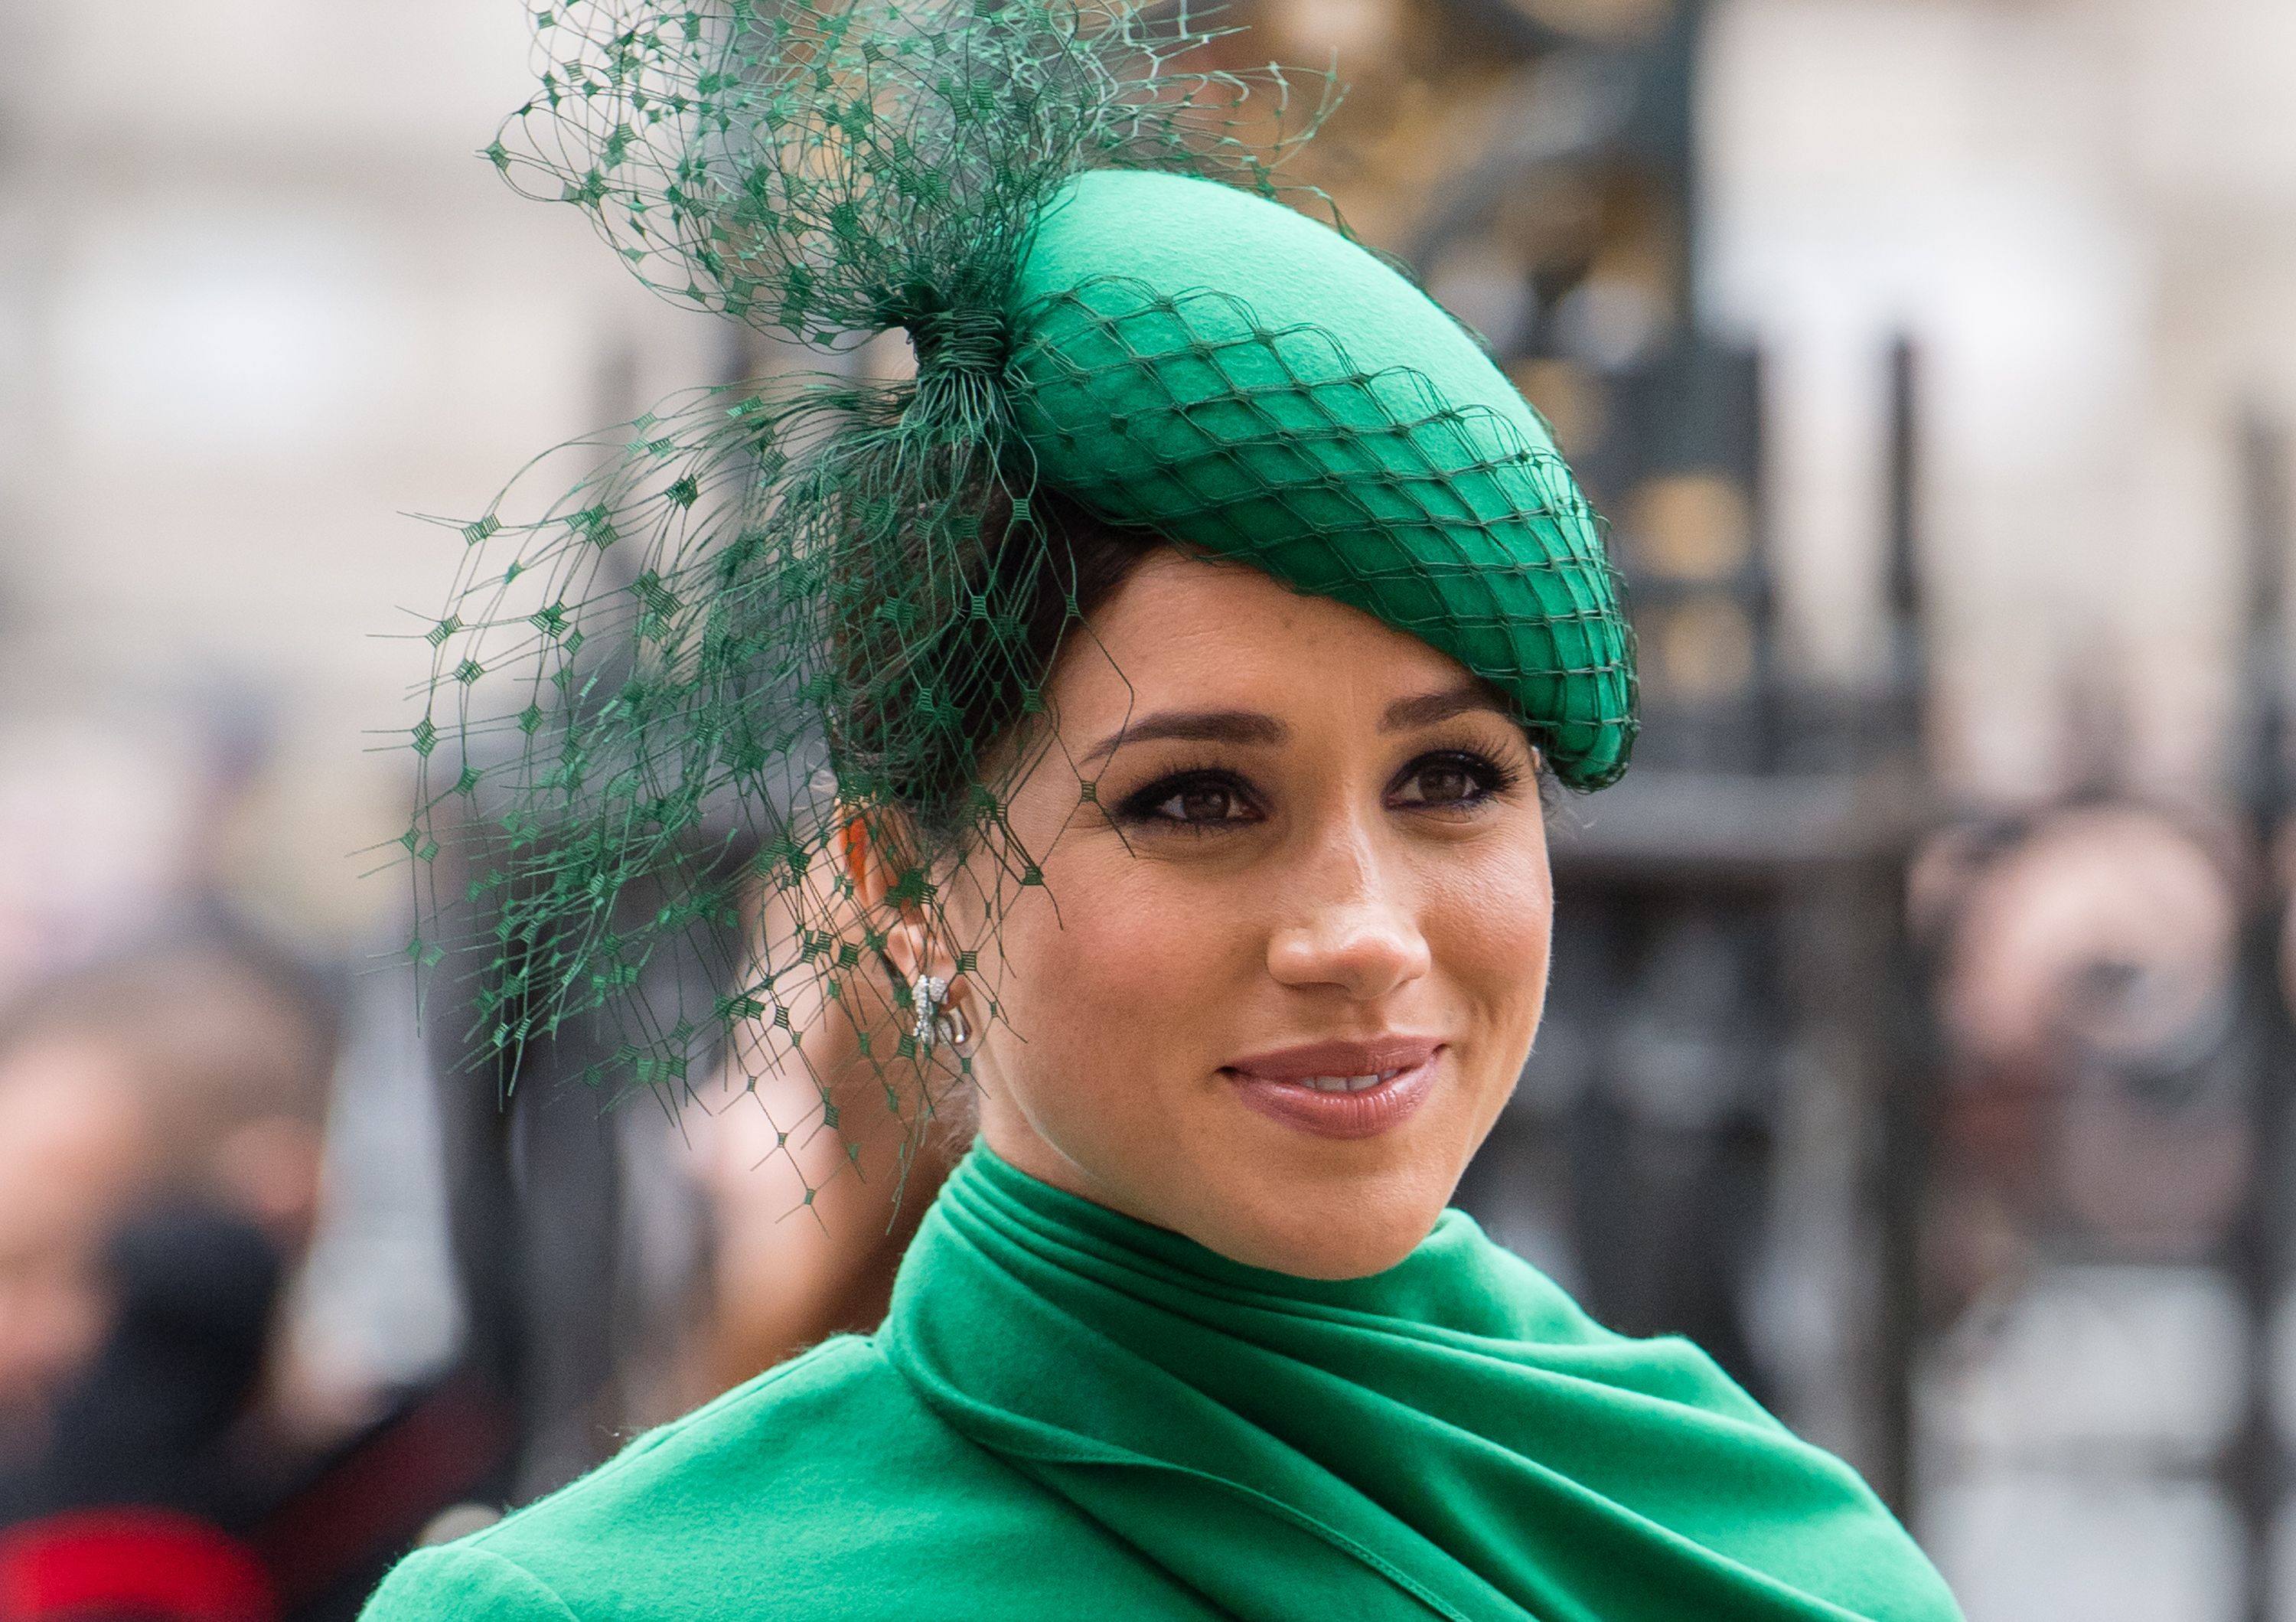 Meghan Markle at the Commonwealth Day Service 2020 on March 09, 2020 in London, England | Photo: Getty Images